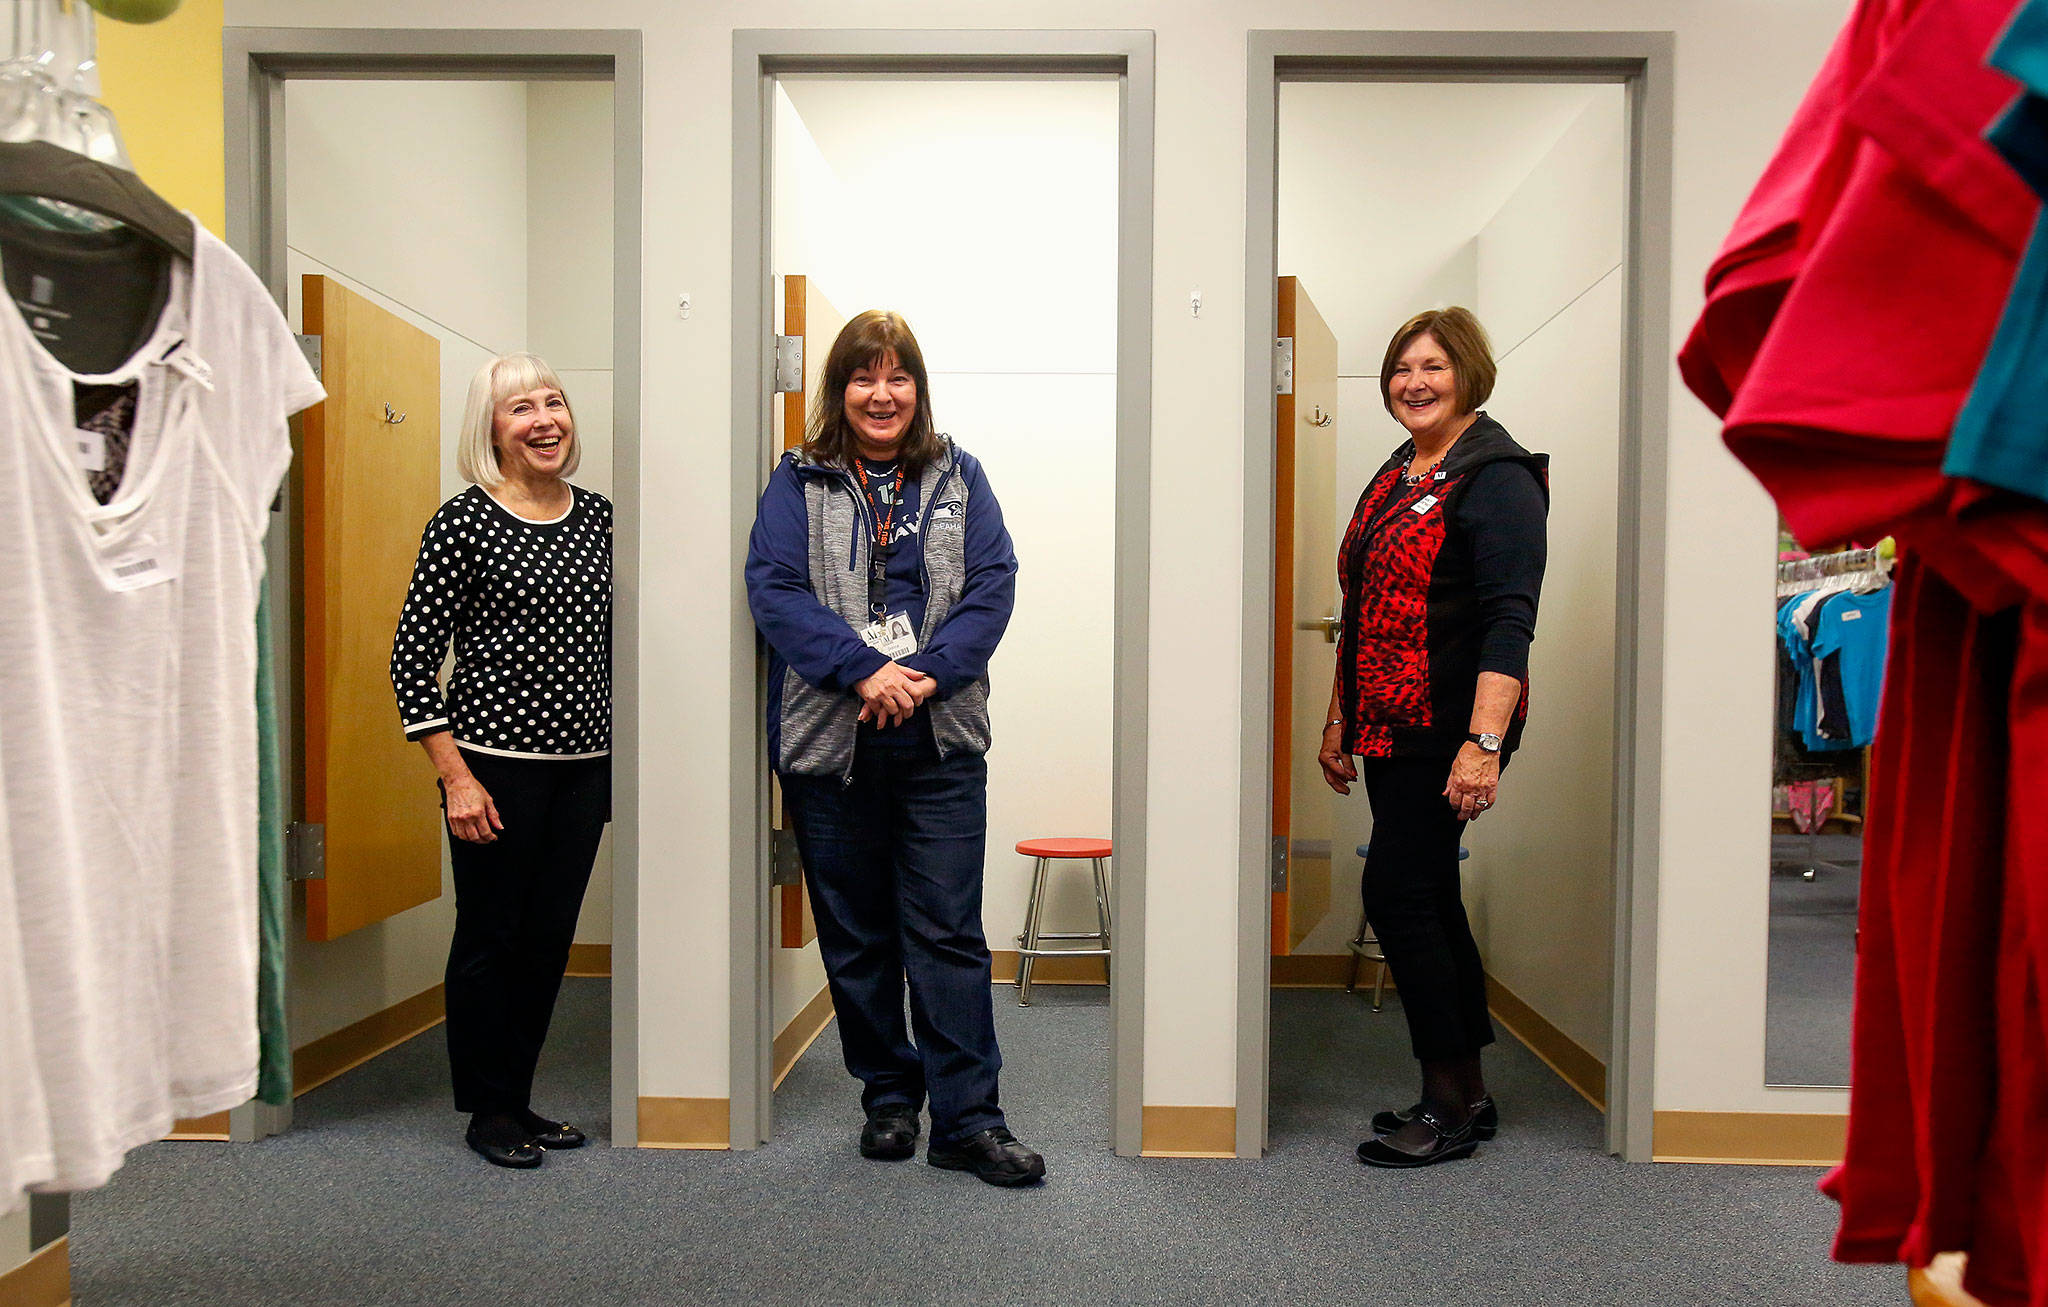 Three Assistance League of Everett volunteers stand ready in fitting rooms that help Operation School Bell assist kids in getting the clothes they want and need. They are Assistance League president Carla Hogan (left), Donna Day and Nancy Juntwait. The Assistance League of Everett is an all-volunteer organization that serves low-income families through Operation School Bell and other programs.